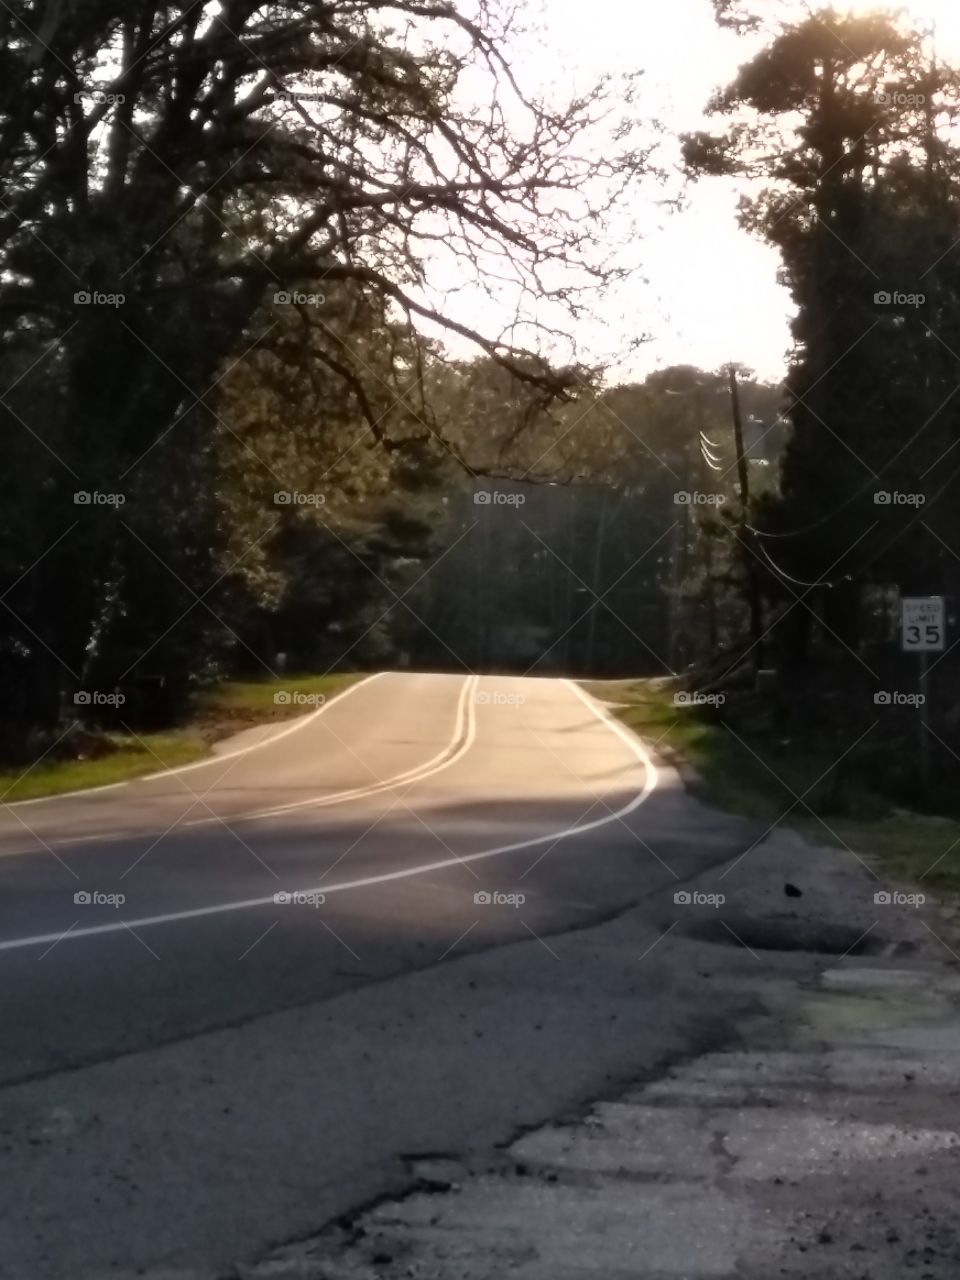 Unoccupied road at dusk in a small country town in the foothills of North Carolina.